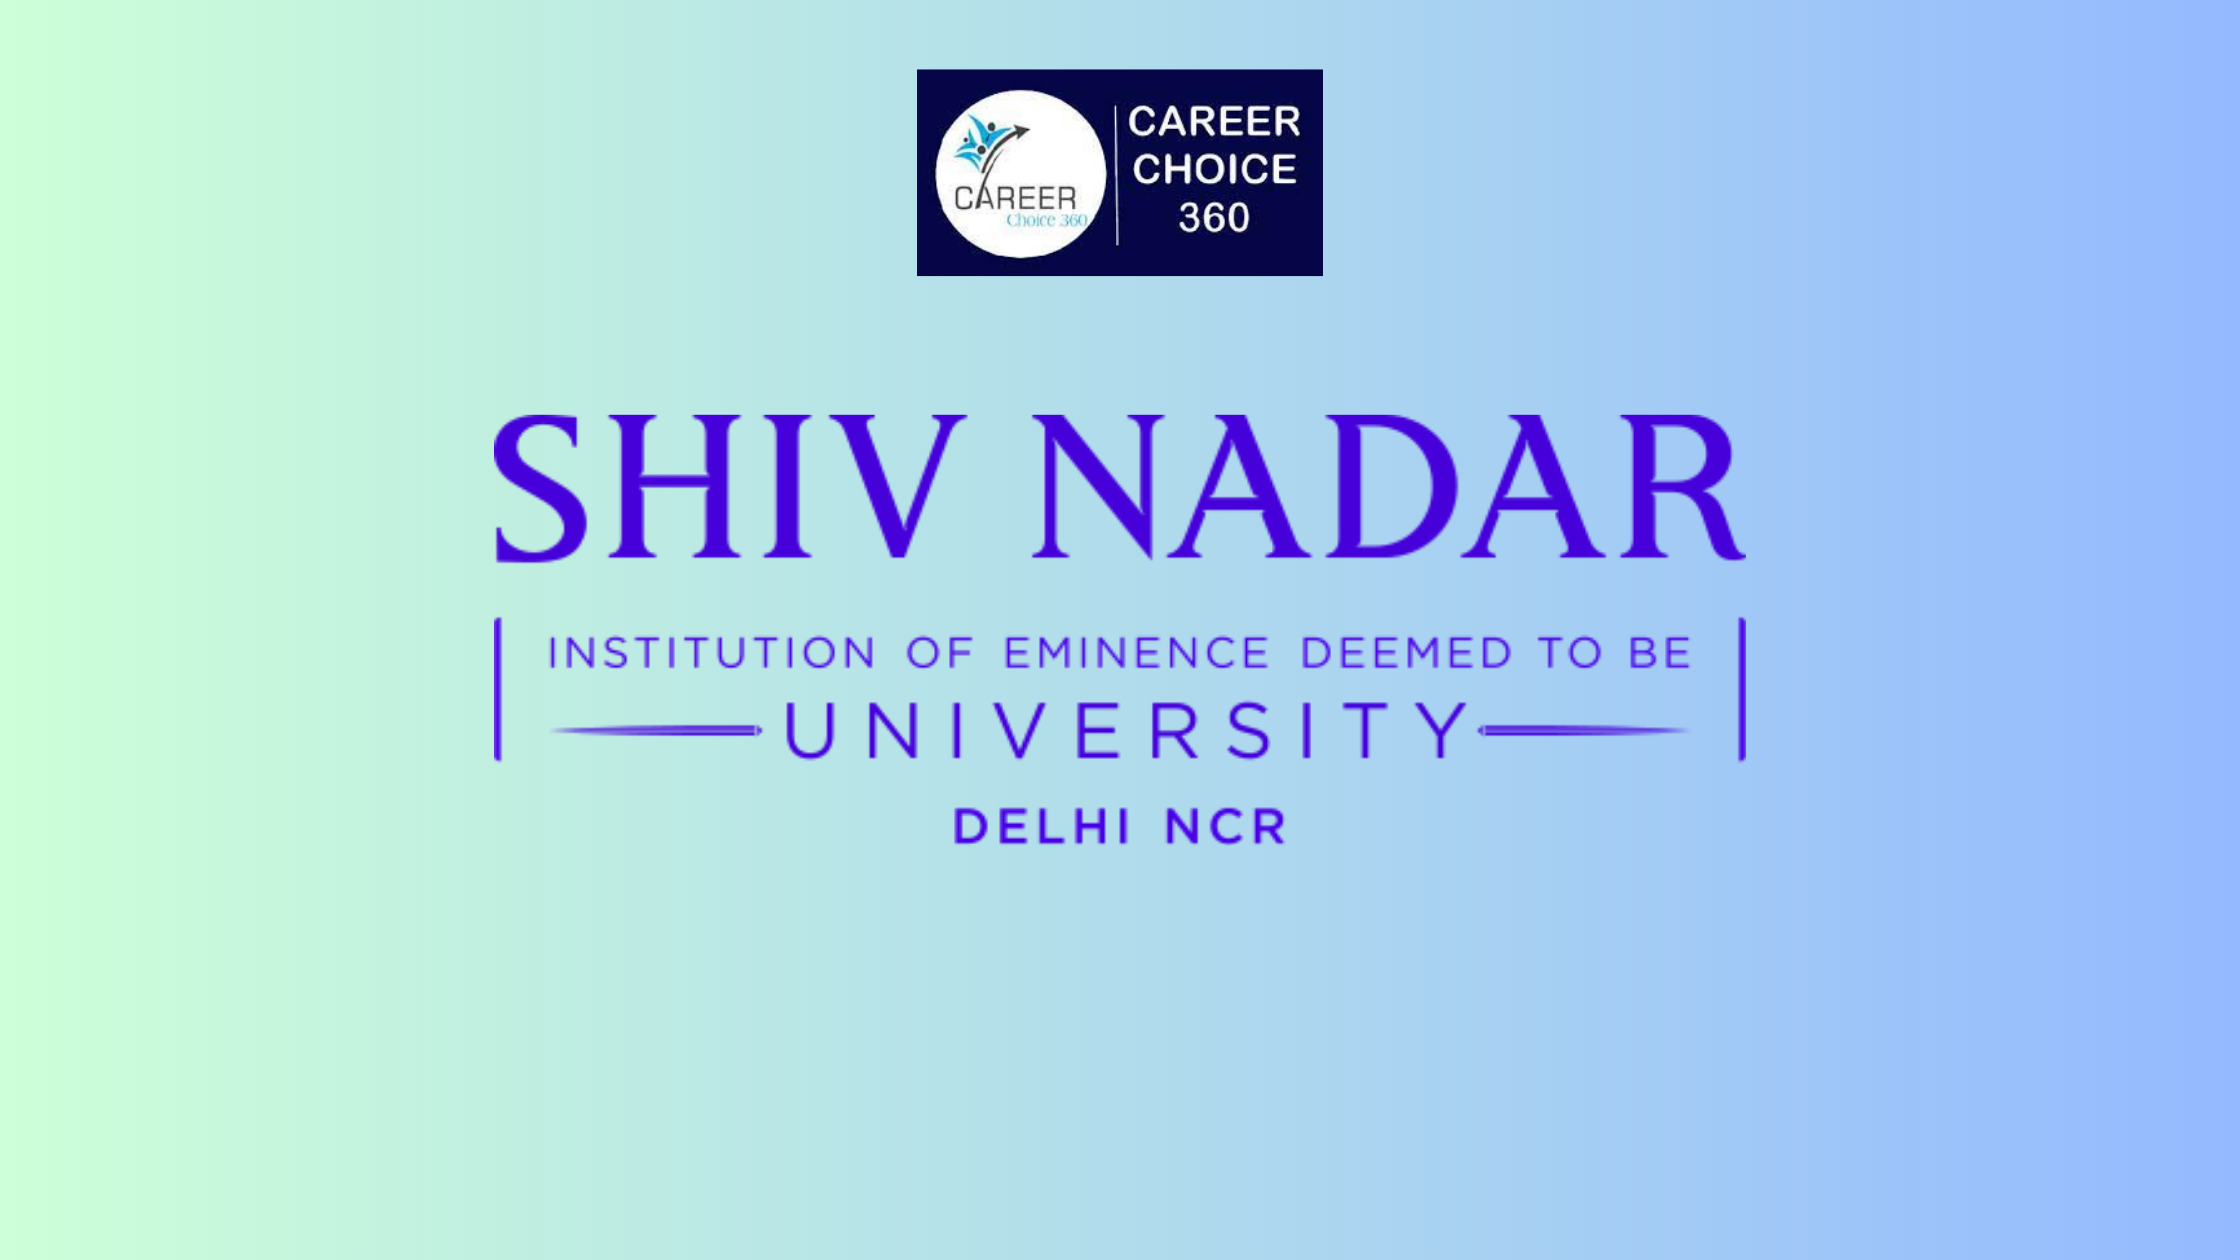 You are currently viewing Shiv Nadar University: Highlights, Course & Fees, Admission procedure, Rankings, and Placements